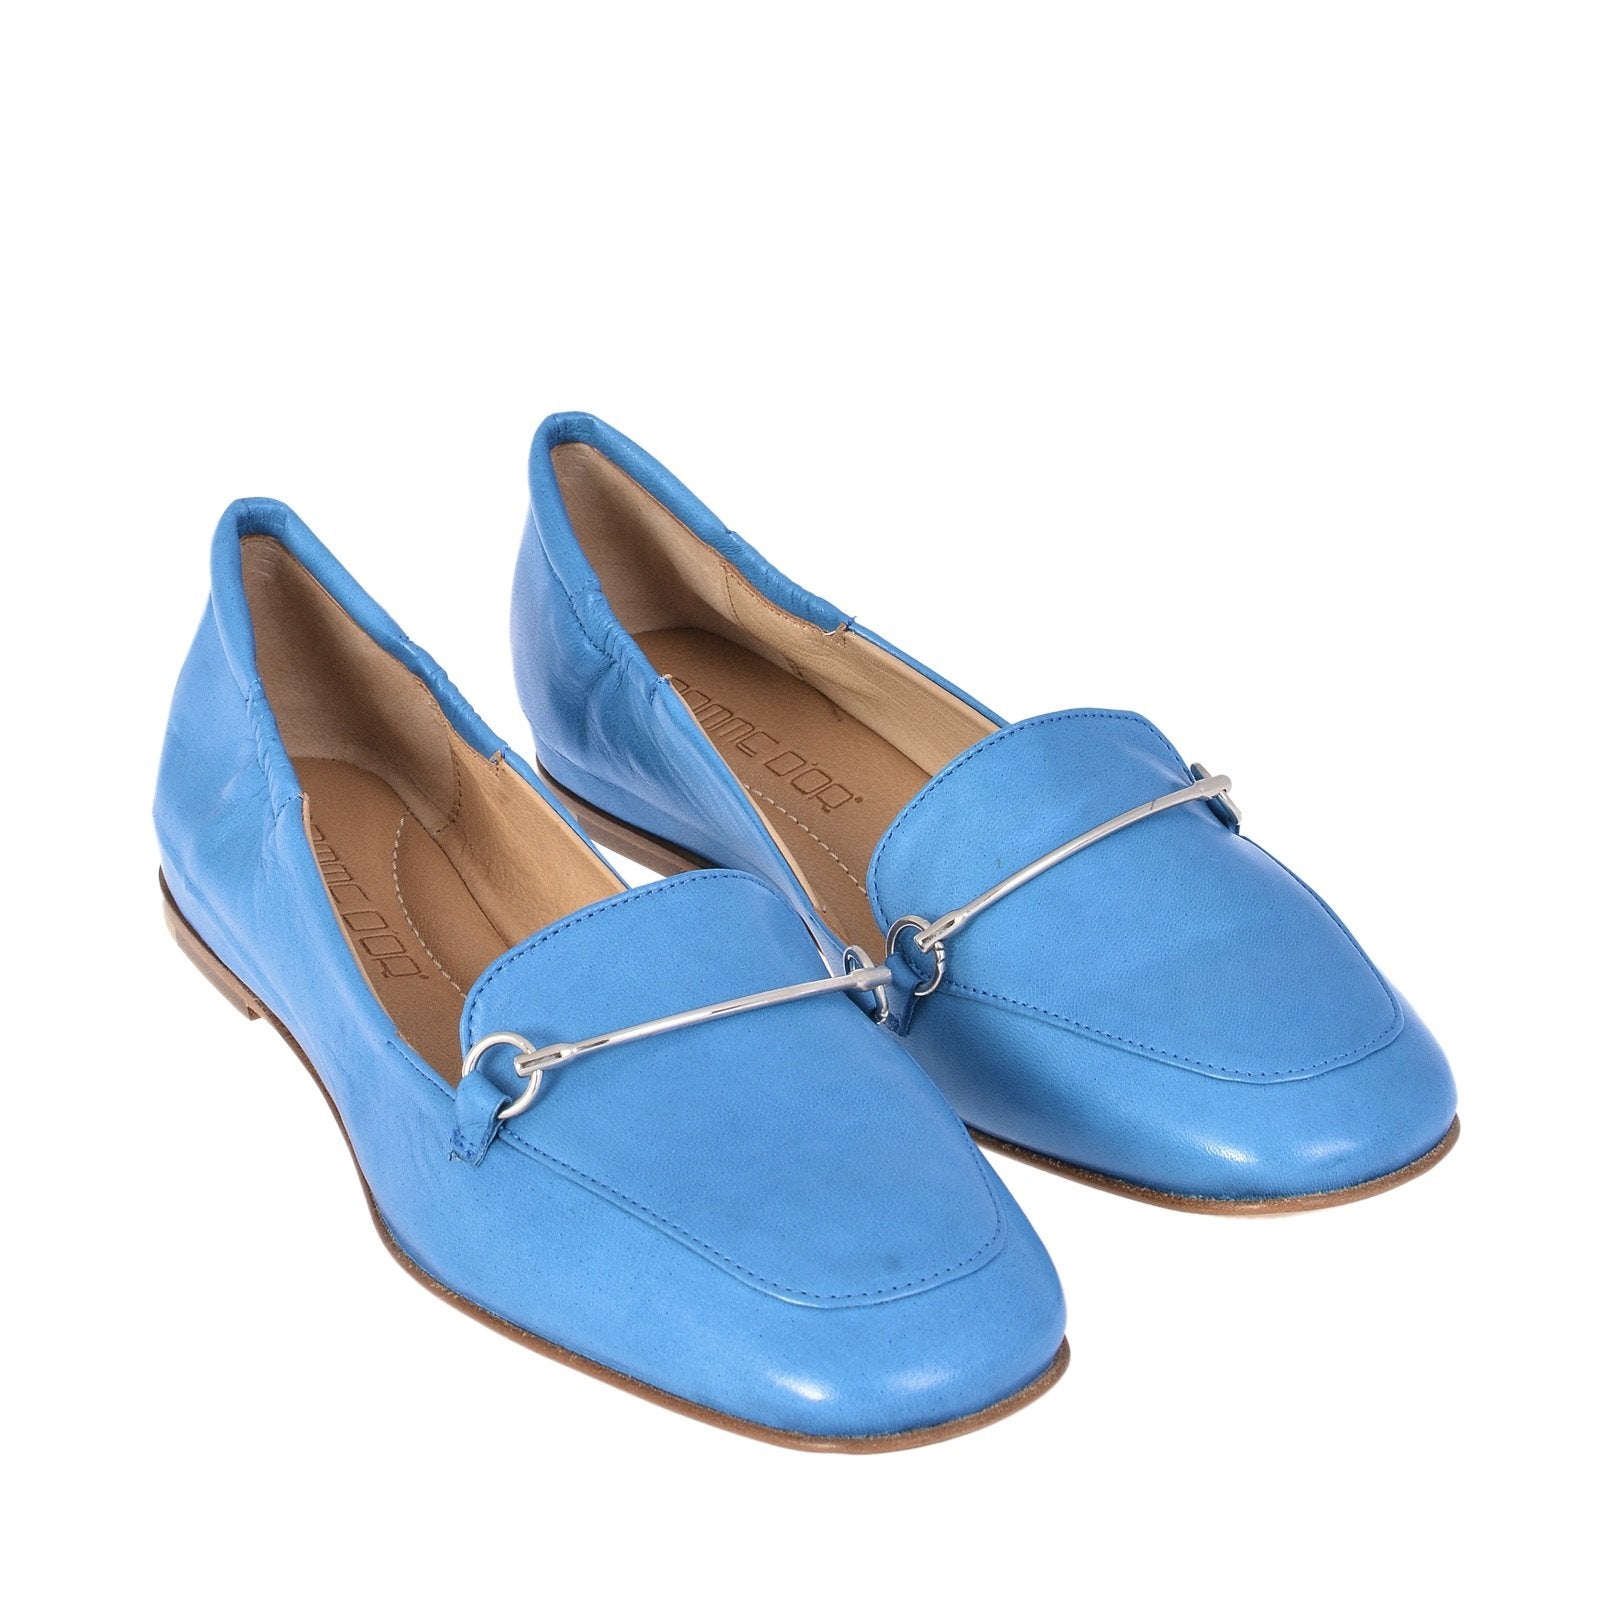 Lena Light Blue Leather Loafers Flats 1144PUNICE - 3